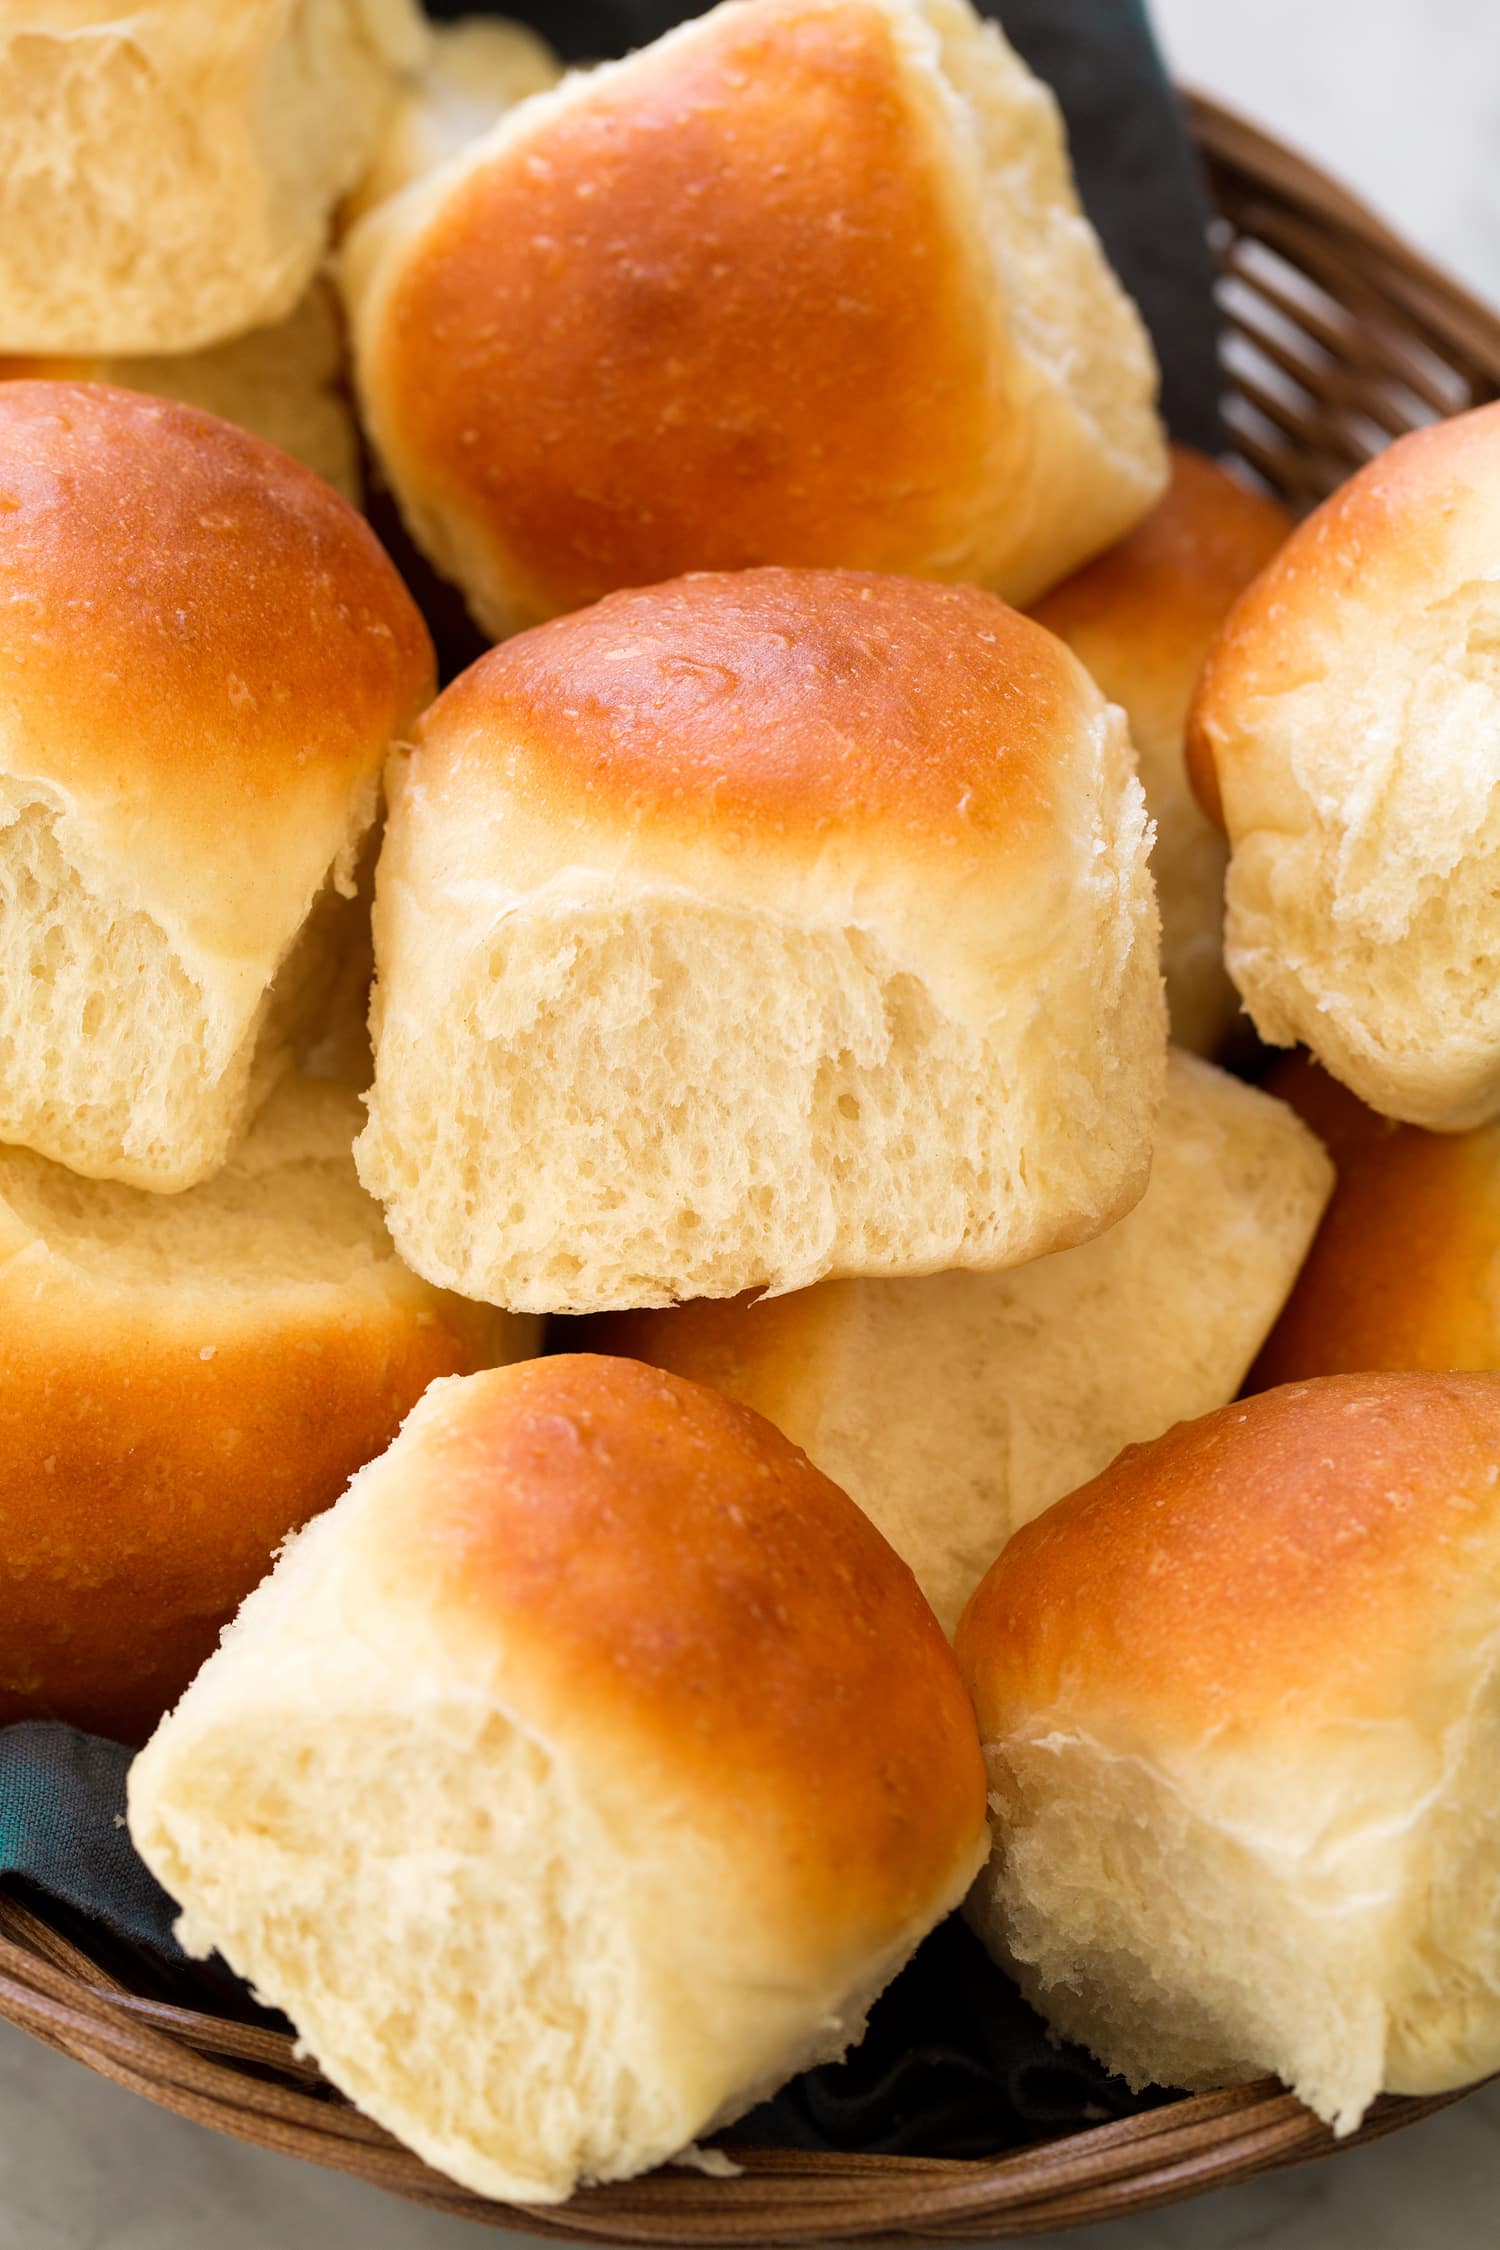 Close up photo of homemade dinner roll showing soft and fluffy texture and golden brown tops.